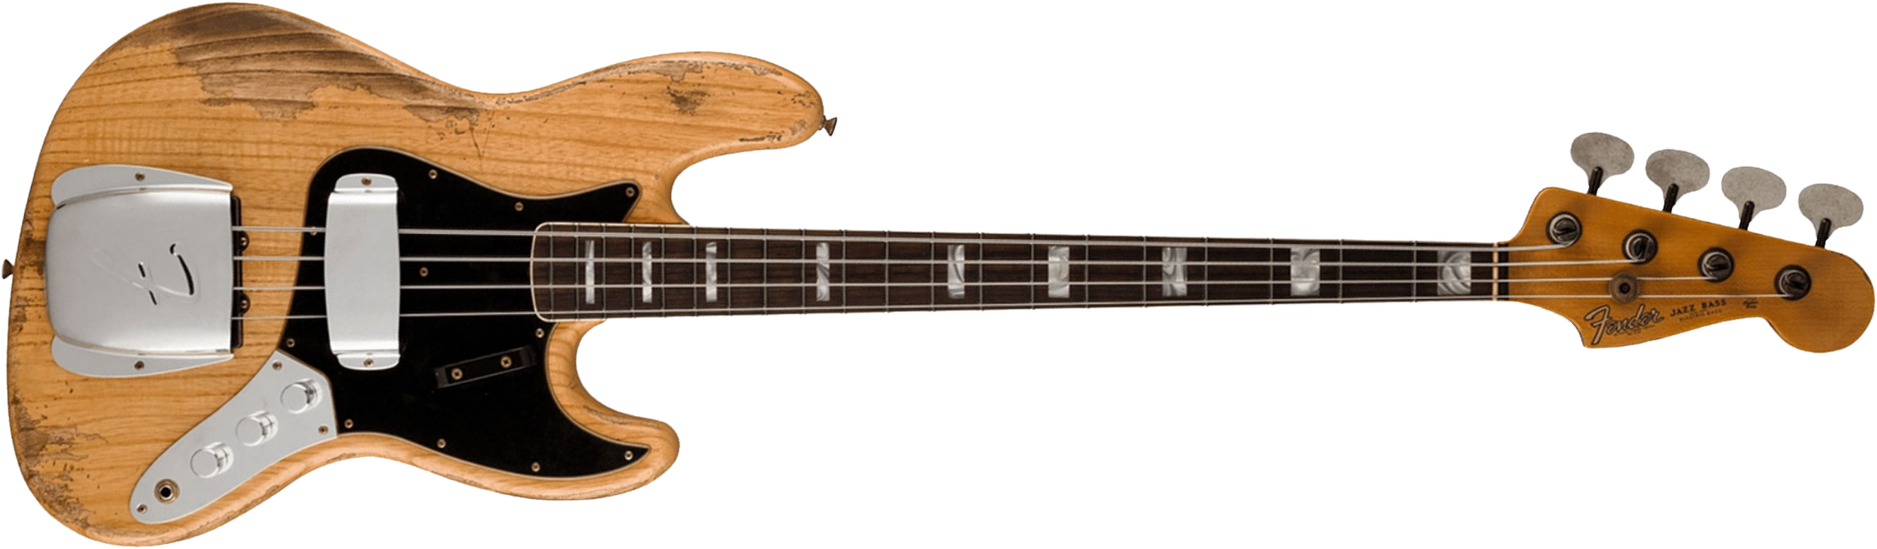 Fender Custom Shop Jazz Bass Custom Rw - Heavy Relic Aged Natural - Basse Électrique Solid Body - Main picture